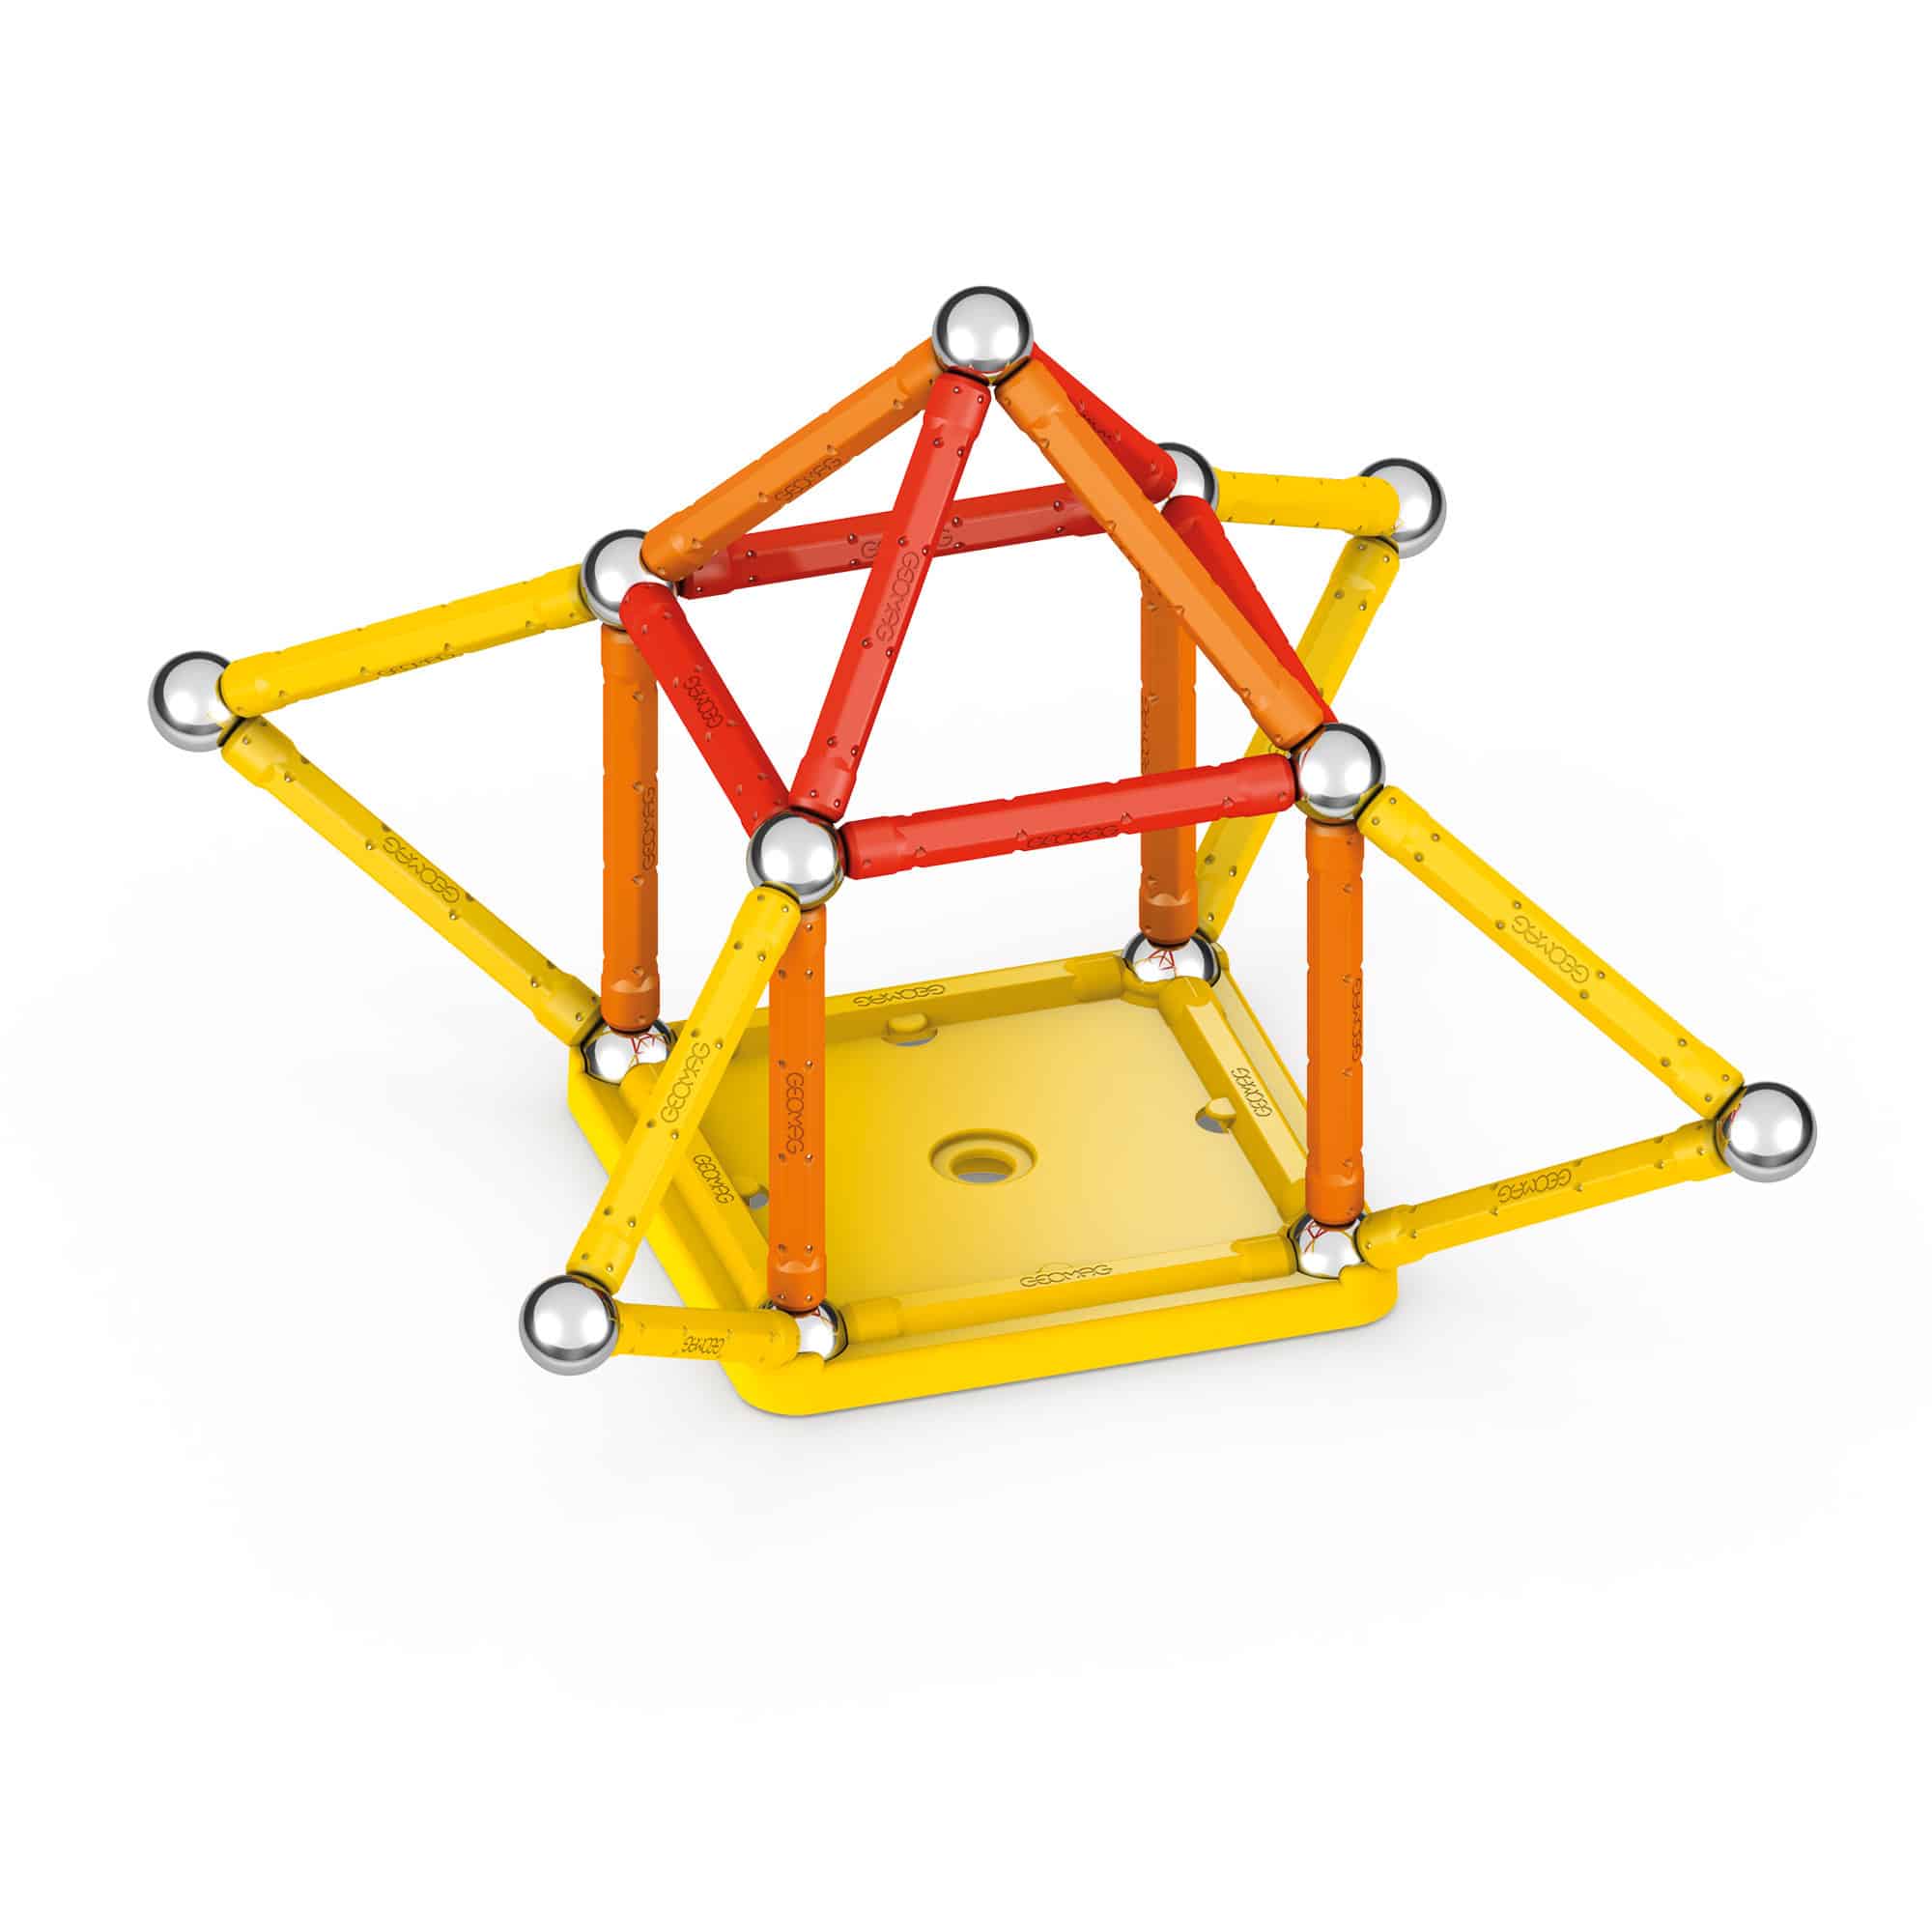 Geomag - 100% Recycled Colour -  42 Piece Set